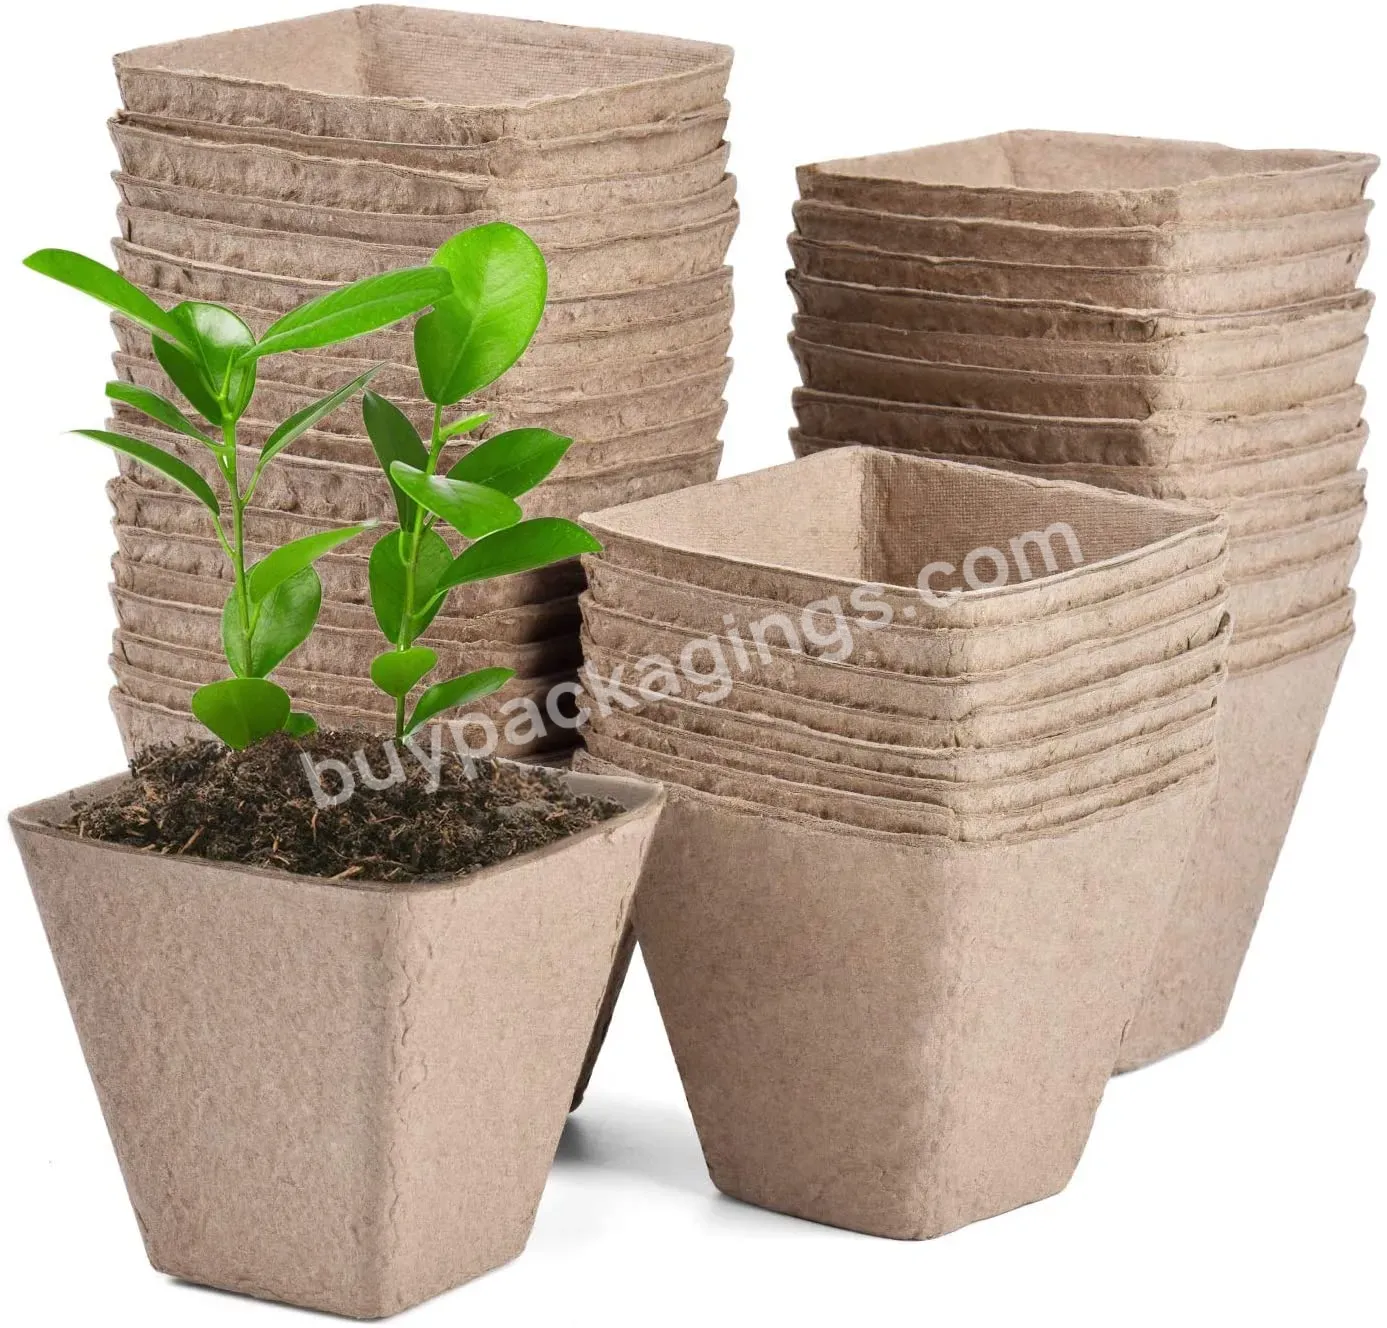 Customized Cheap Peat Pots For Seedlings Gardening Seed Starter Tray Biodegradable And Compostable Manufacturer - Buy Seed Starter Pot,Peat Pots,Seeding Pot.